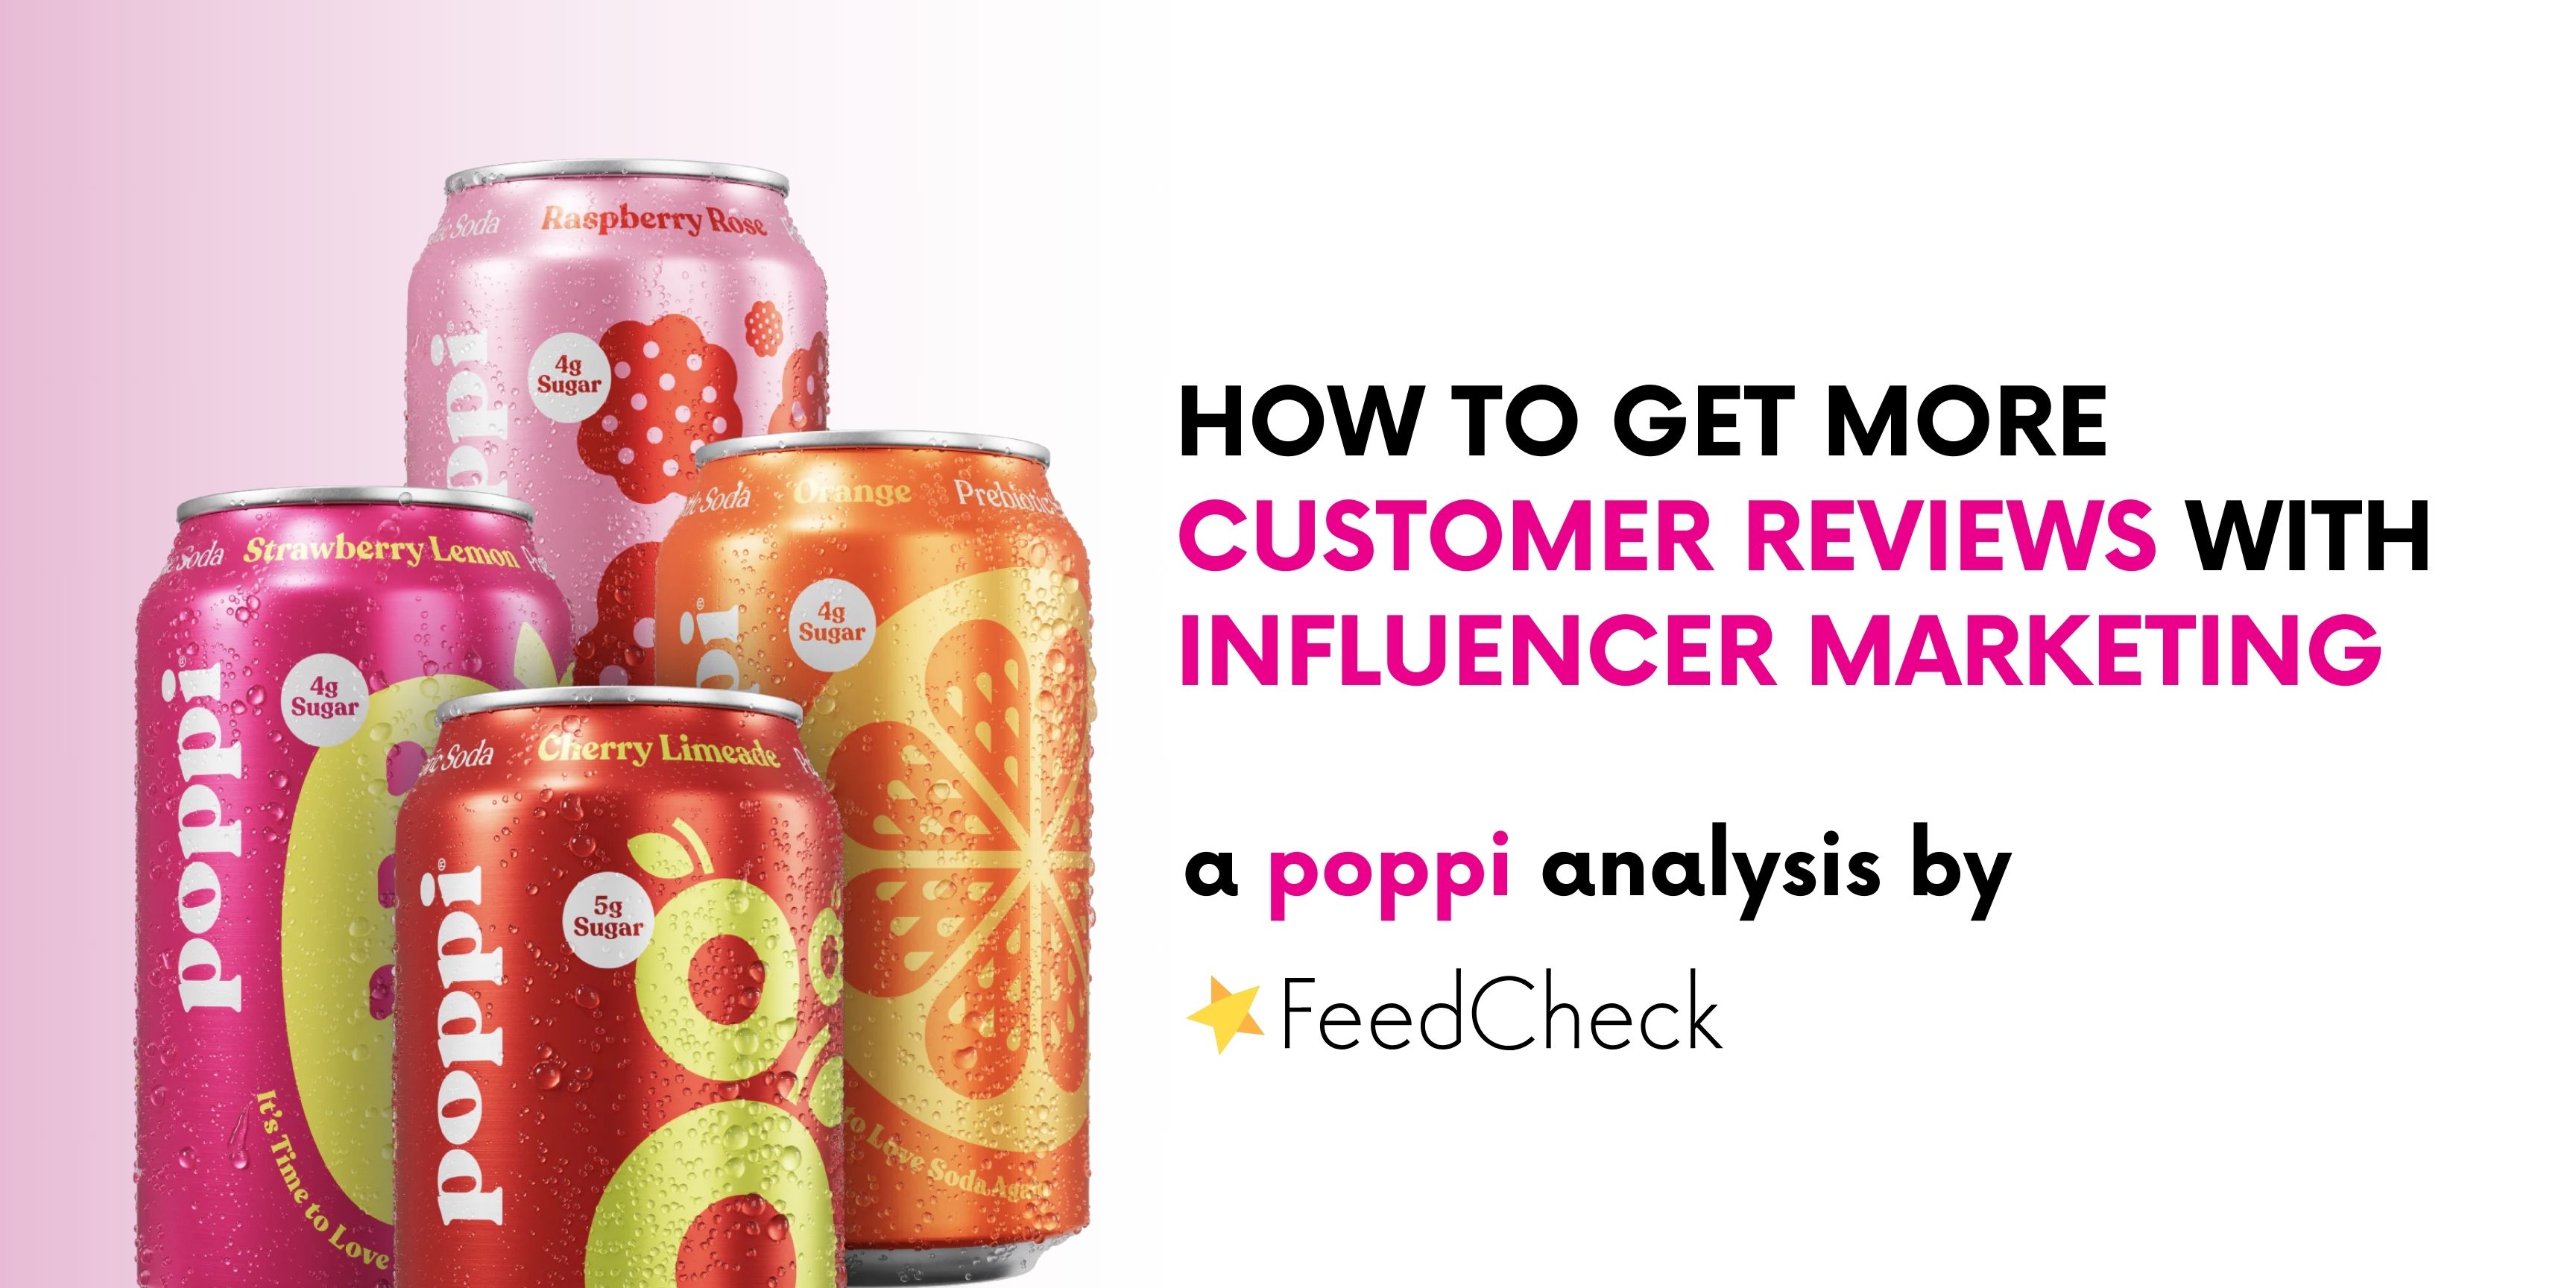 How to get more customer reviews with influencer marketing: the ‘poppi’ model